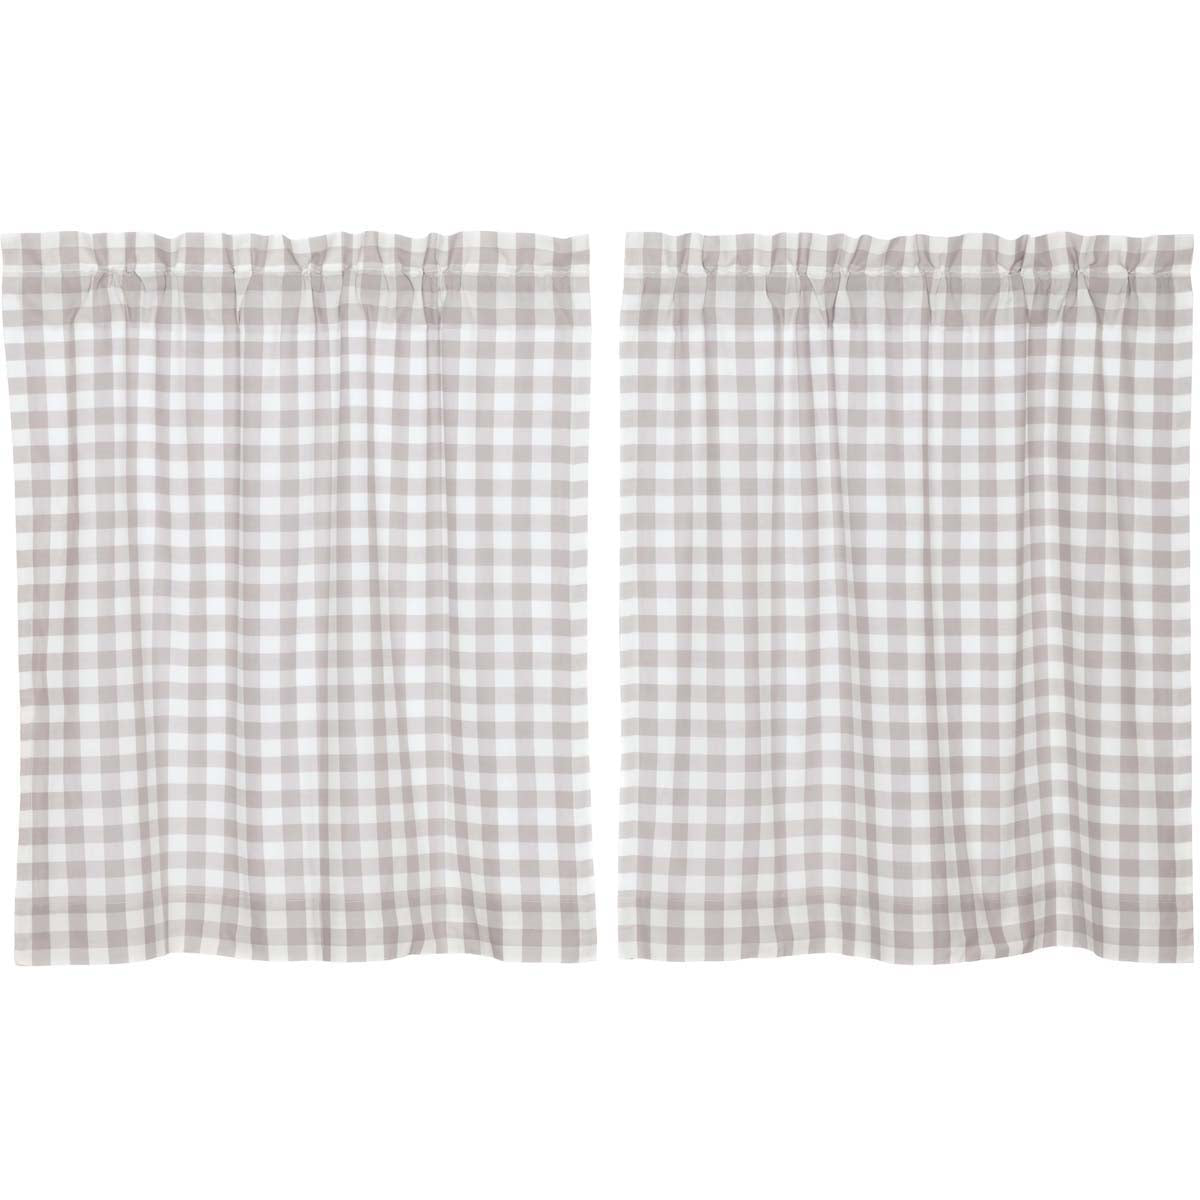 April & Olive Annie Buffalo Grey Check Tier Set of 2 L36xW36 By VHC Brands